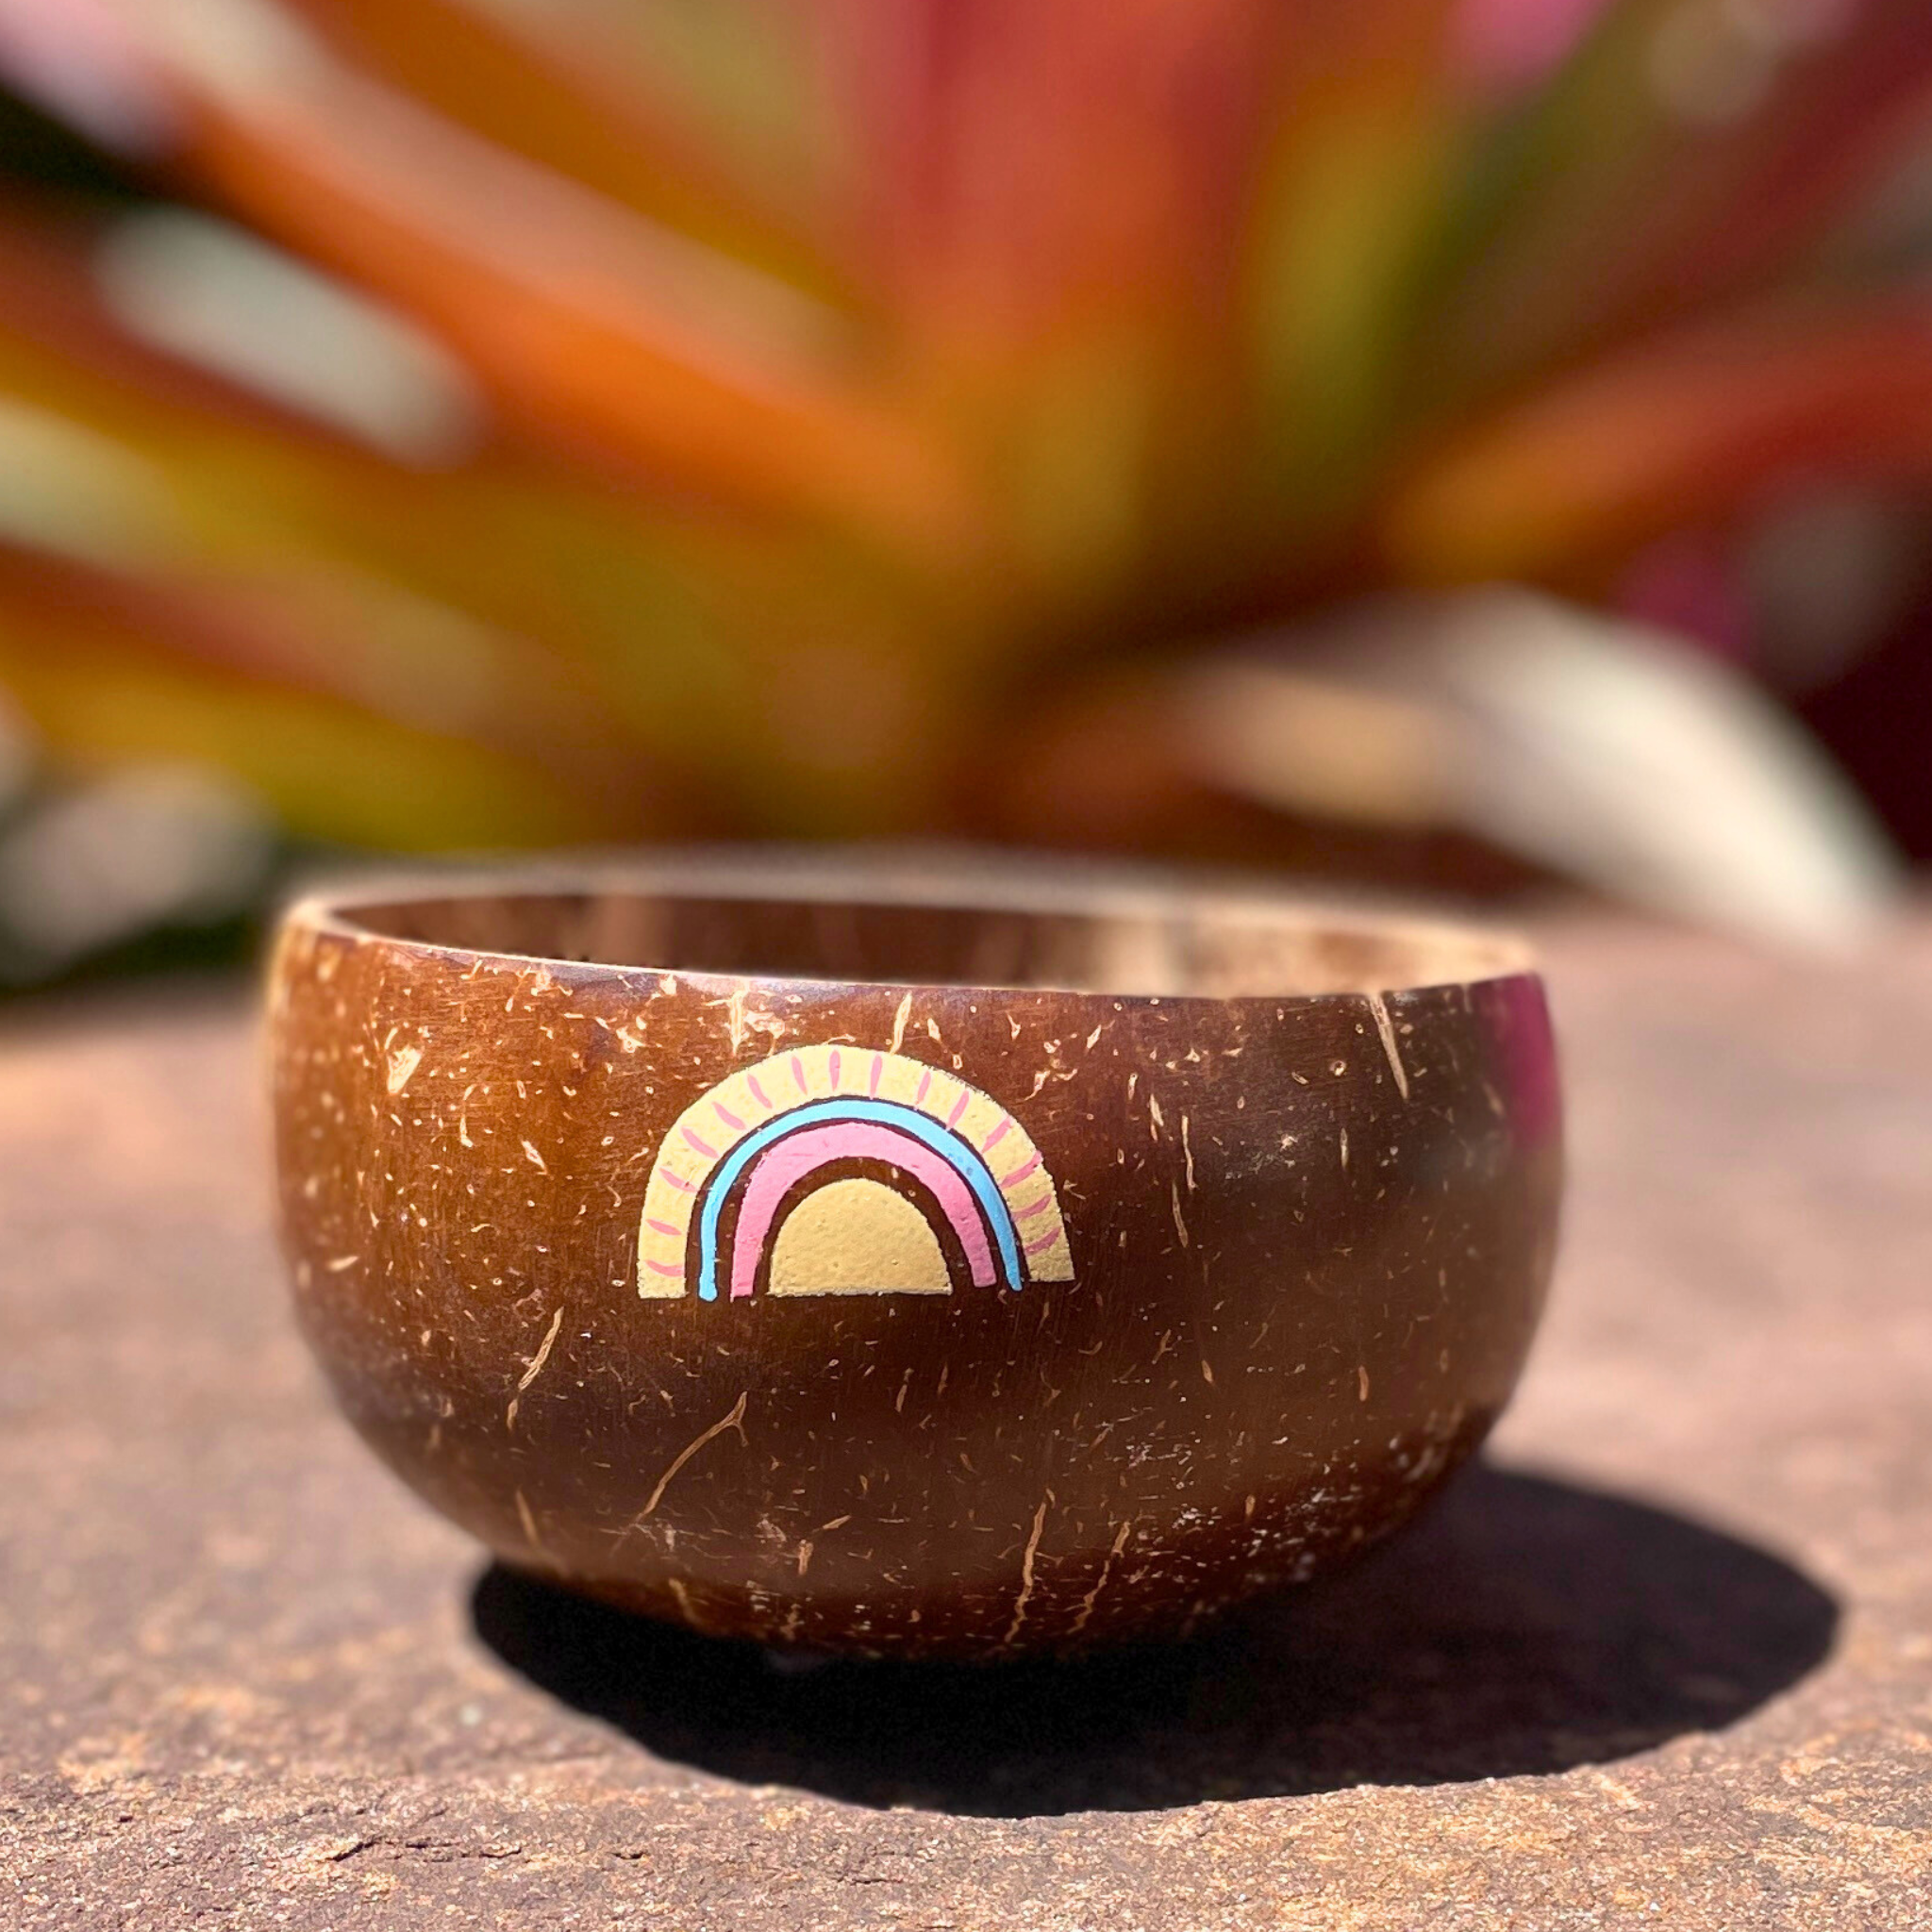 sustainable eco-friendly coconut bowl with painted rainbows